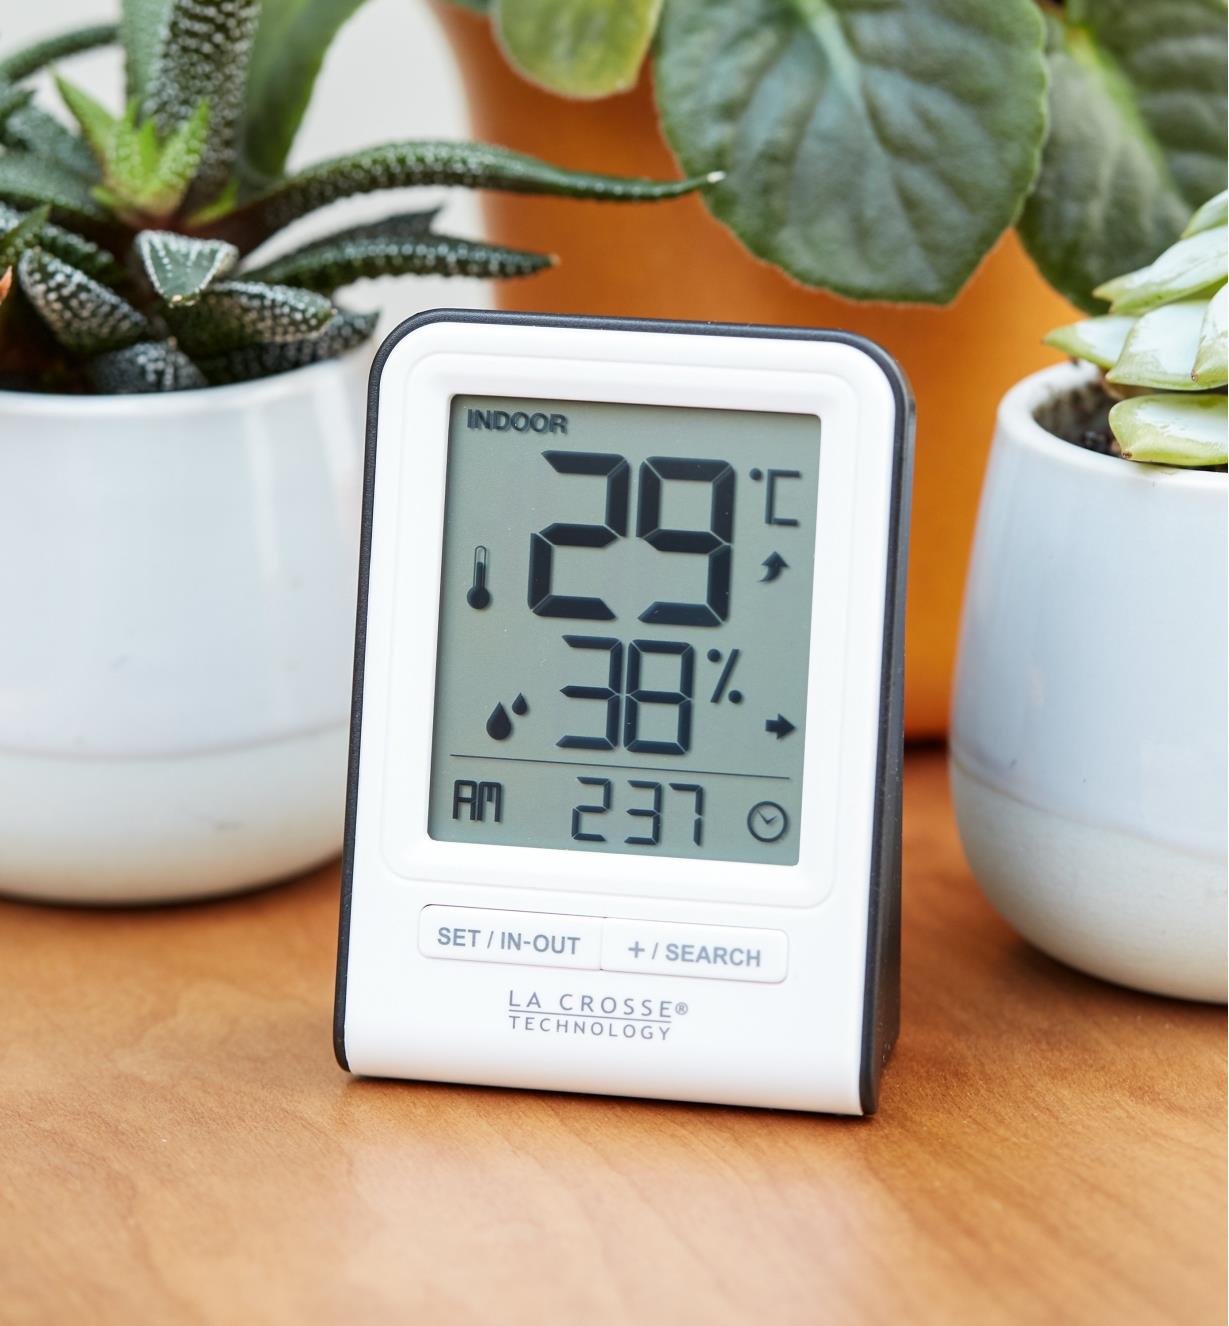 The small secondary display of the Wi-Fi weather station with wind and rain sits on a tabletop